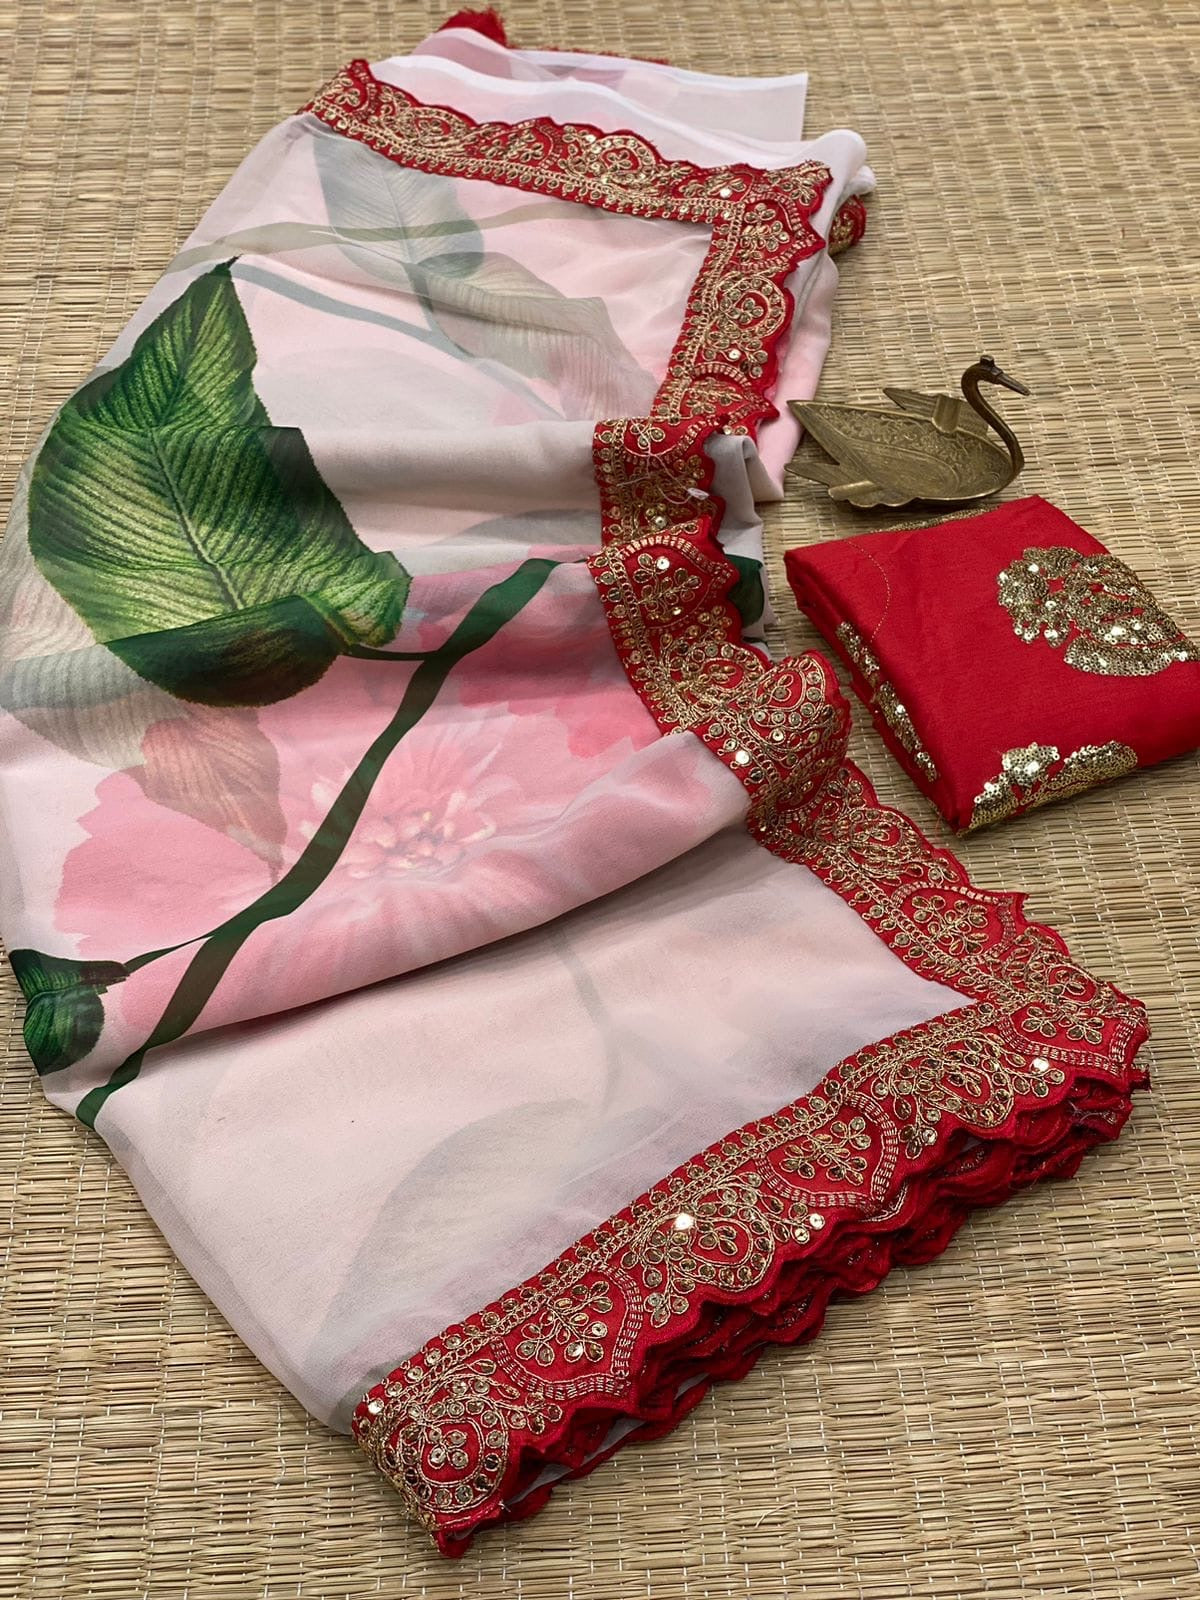 Pastel floral saree with lace border work with stitched blouse